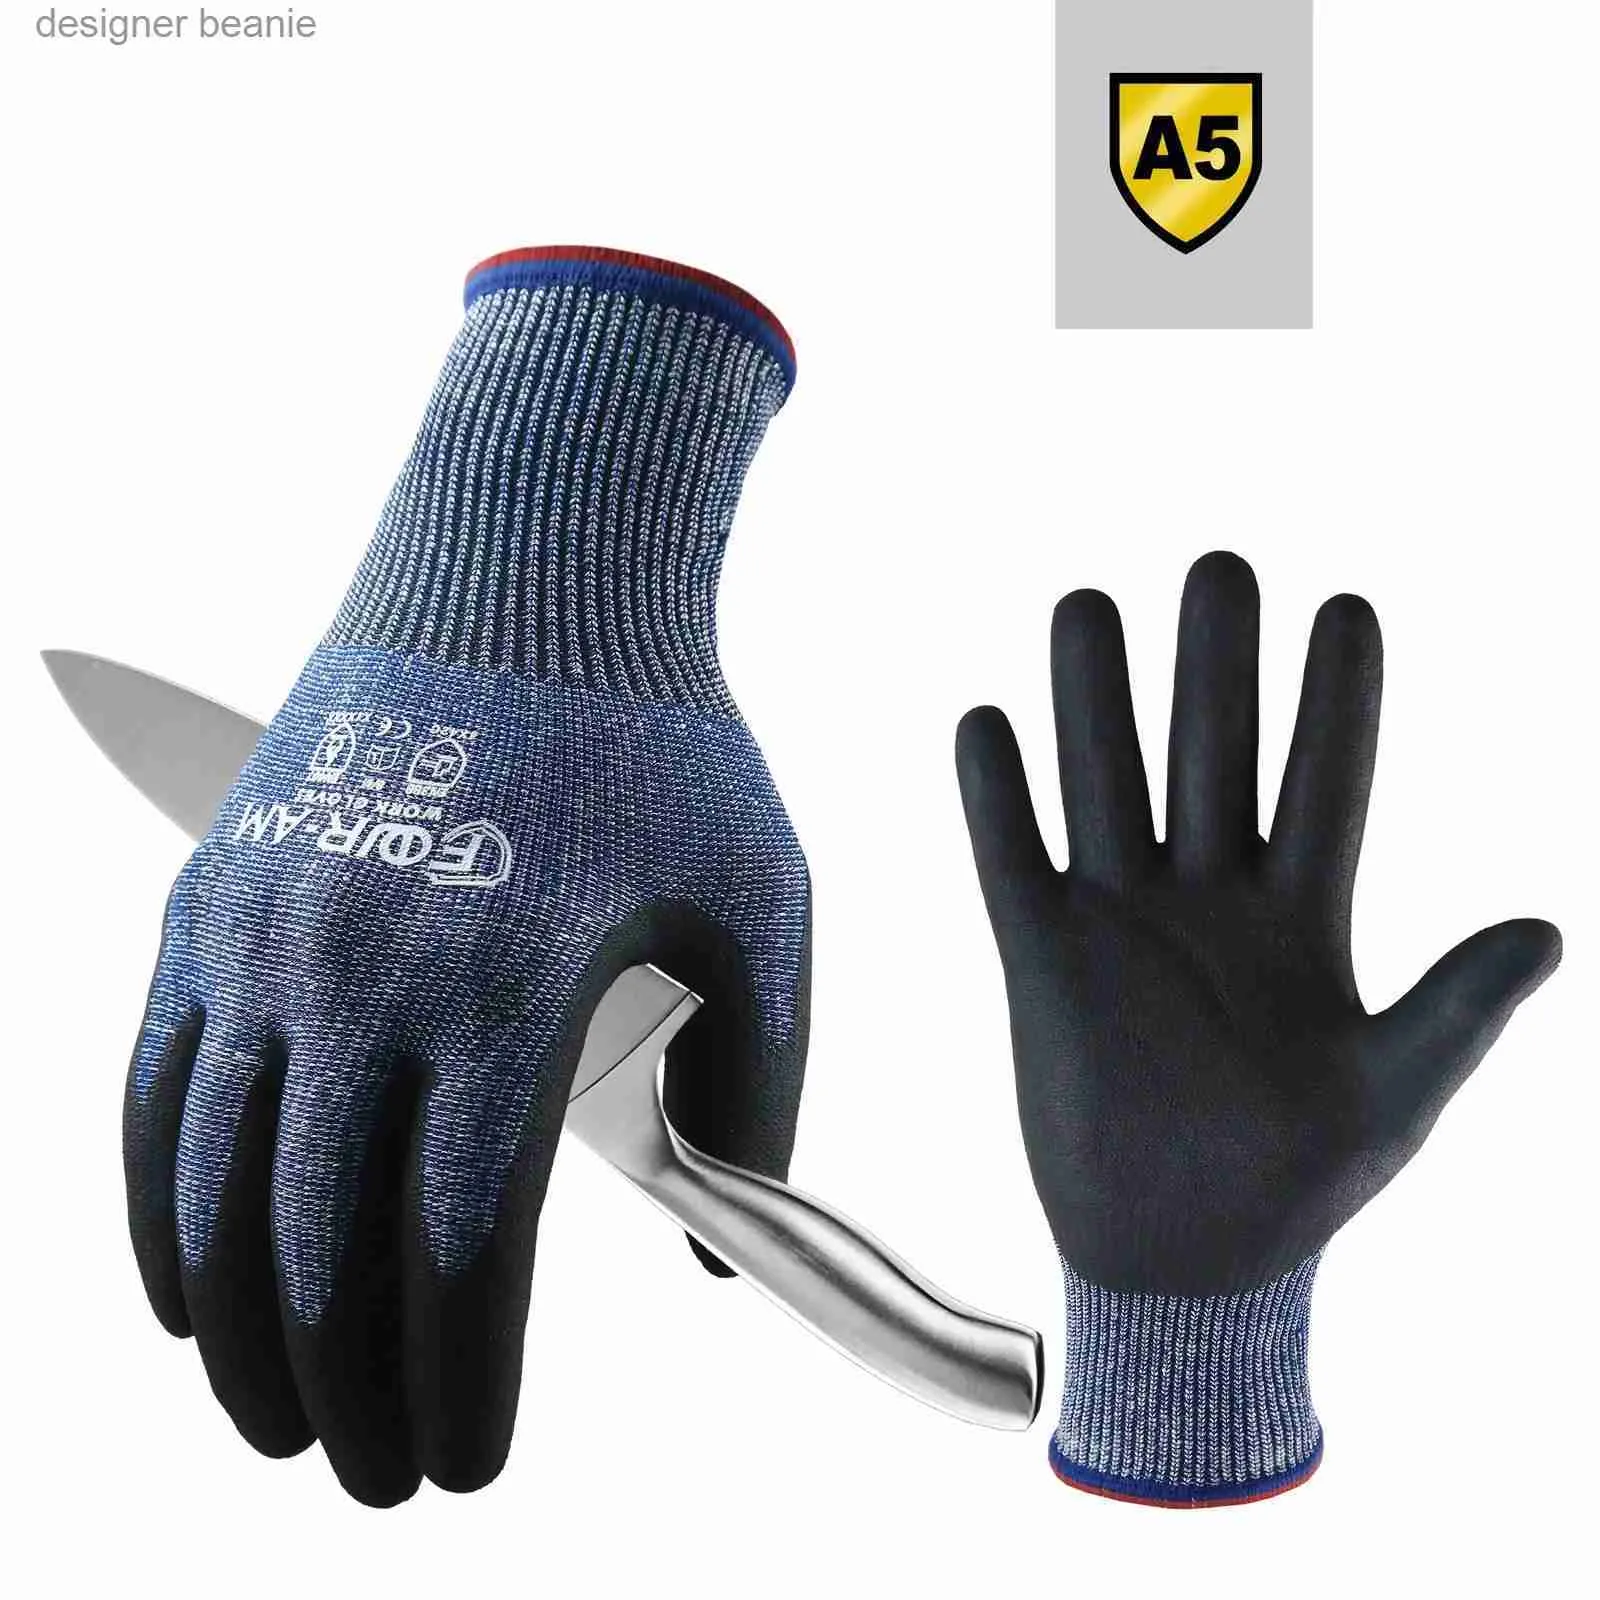 5 Finger Gloves With Cut Resistant Grip, Non Slip Grip For Heavy Duty Work  Breathable Nitrile Foam Coated For Touchscreen Protection In Hindi Level 5  From Designer_beanie, $1.36